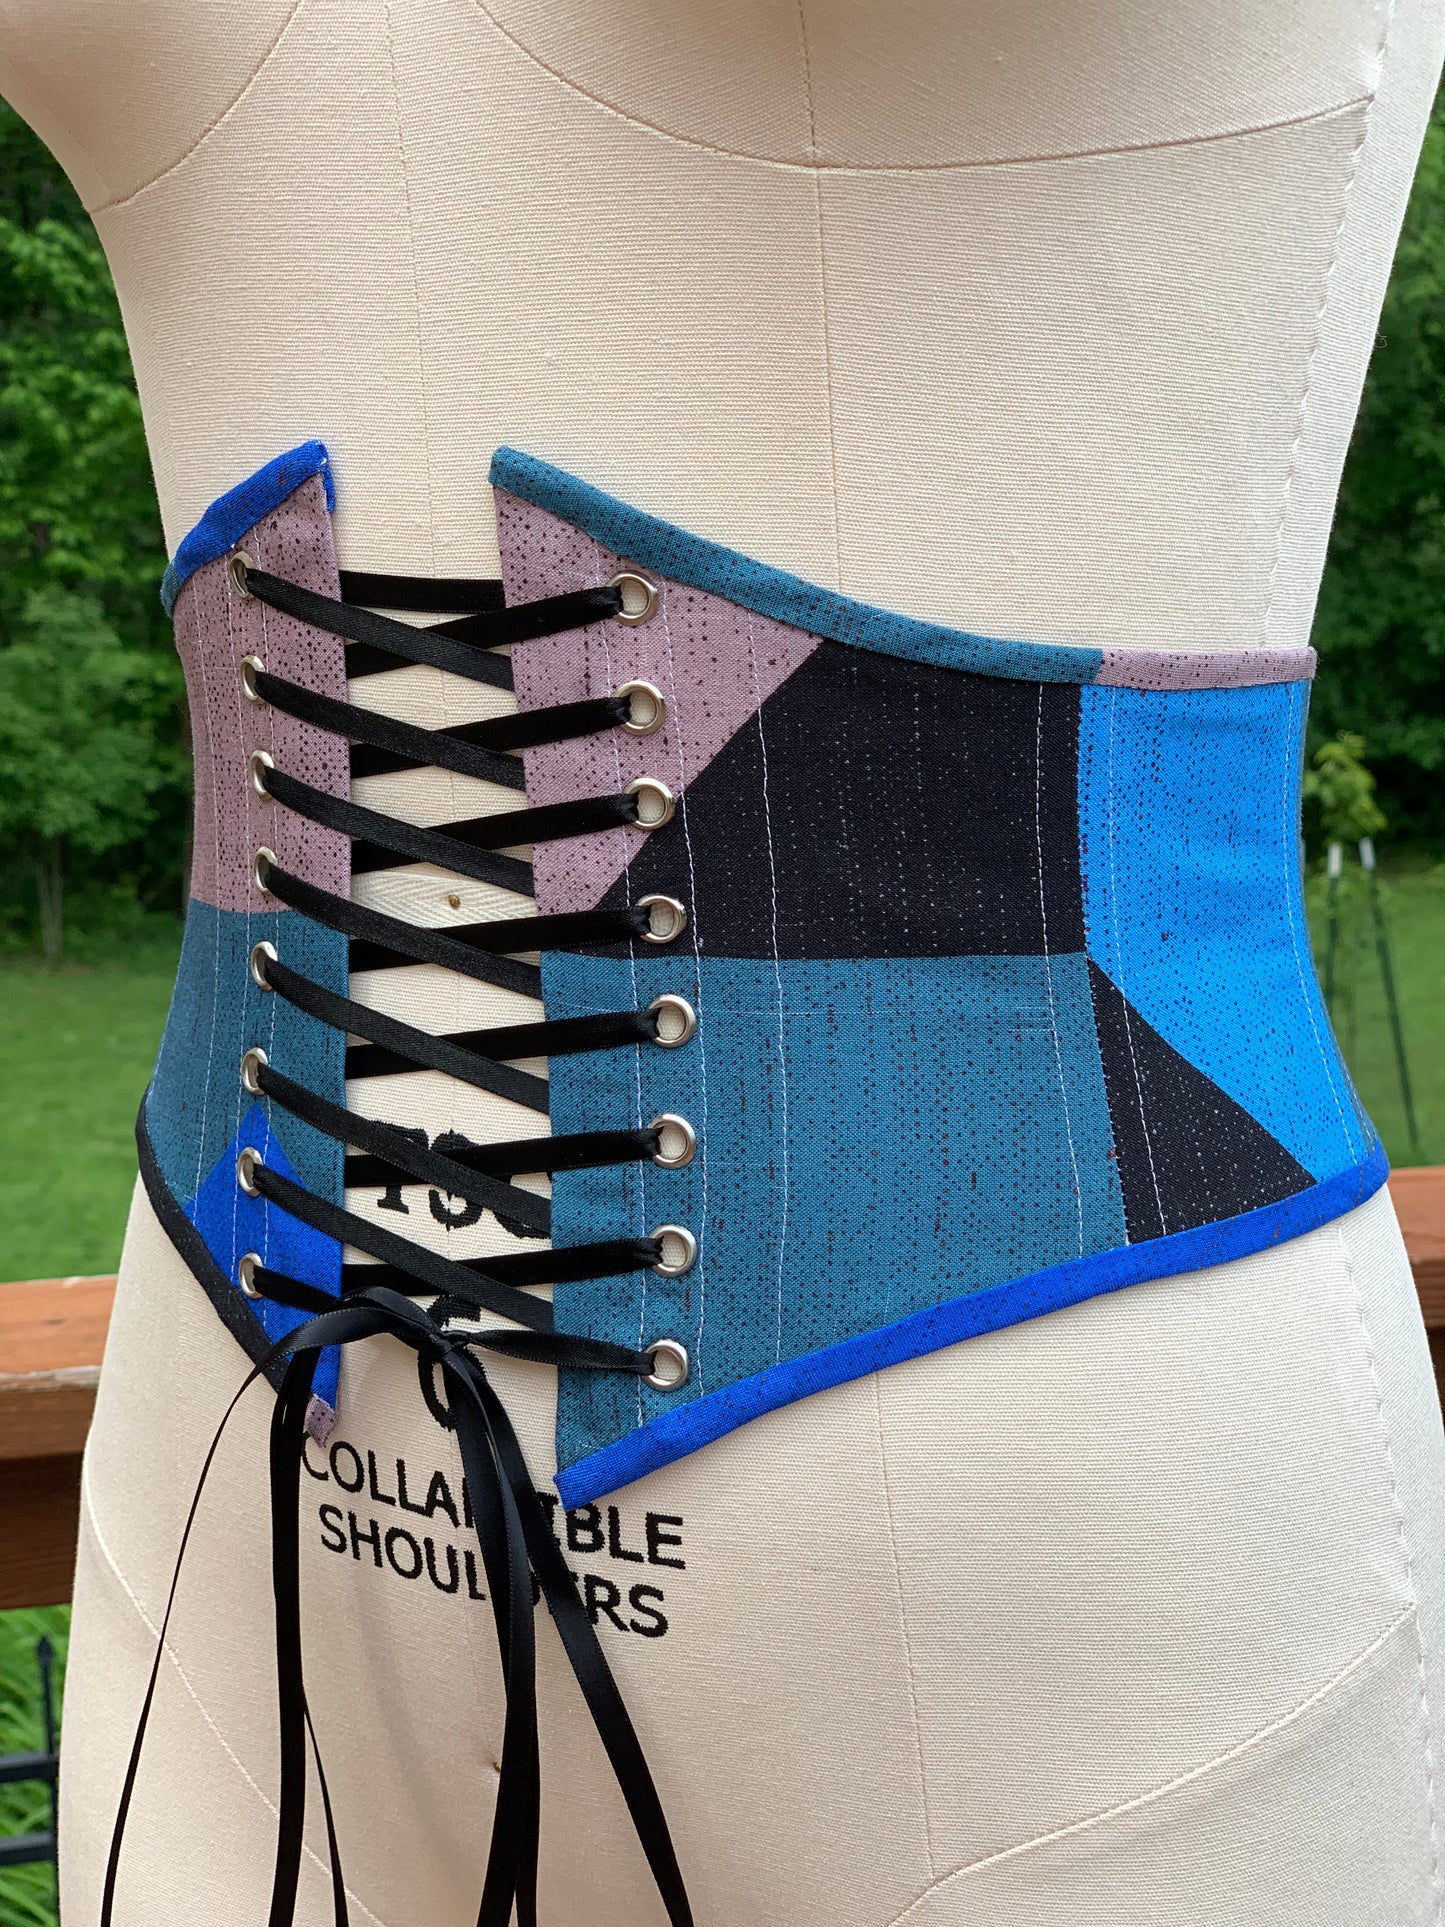 Cobalt Geometric Corset Waist Belt - Available in 12 different sizes